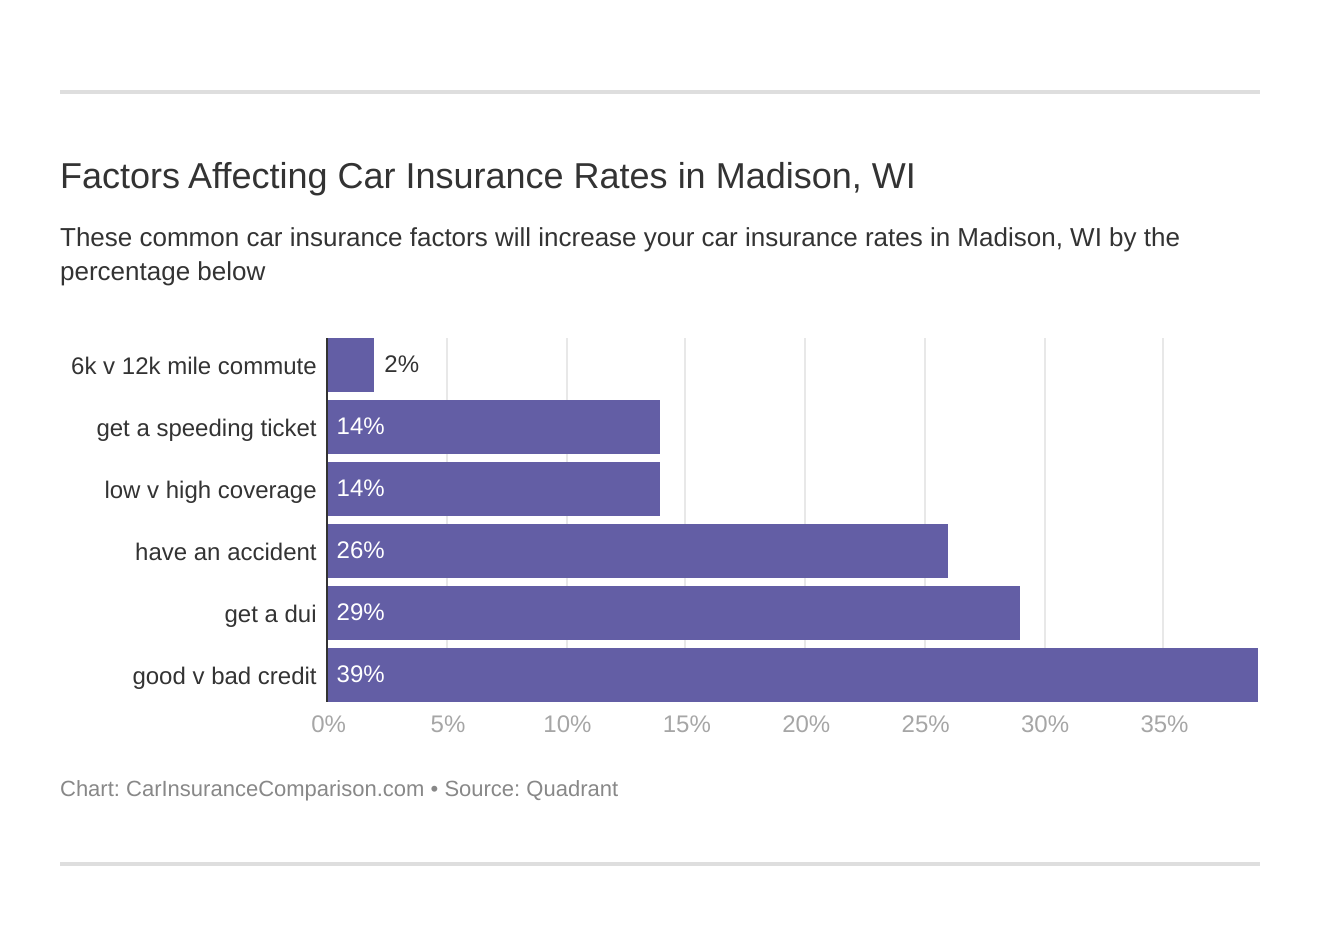 Factors Affecting Car Insurance Rates in Madison, WI